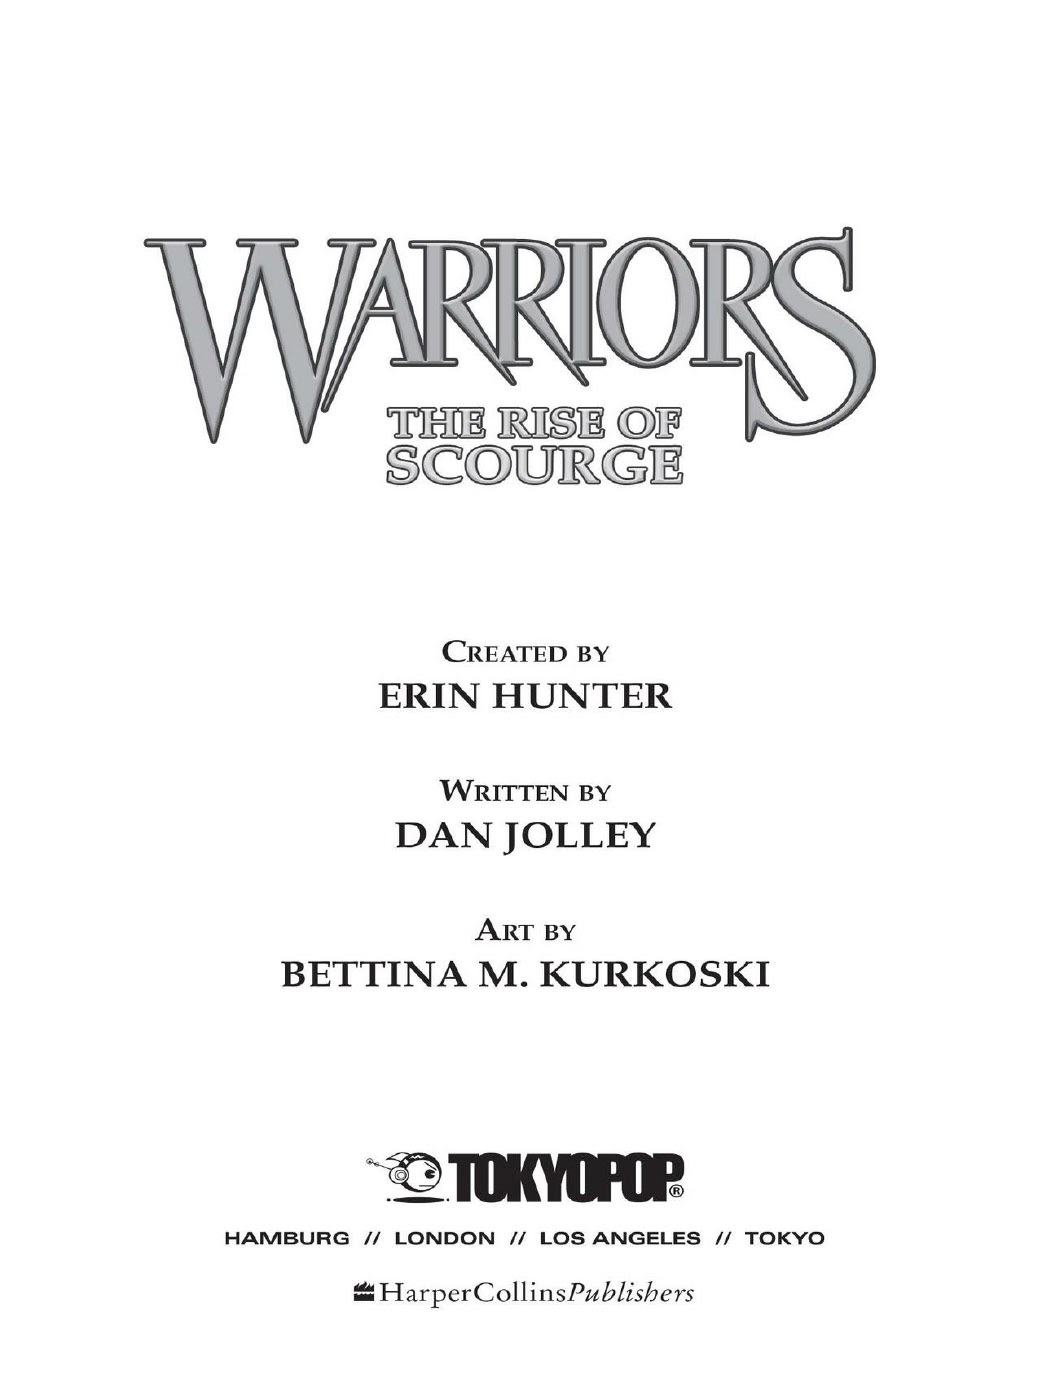 Read online Warriors: The Rise of Scourge comic -  Issue # TPB - 3